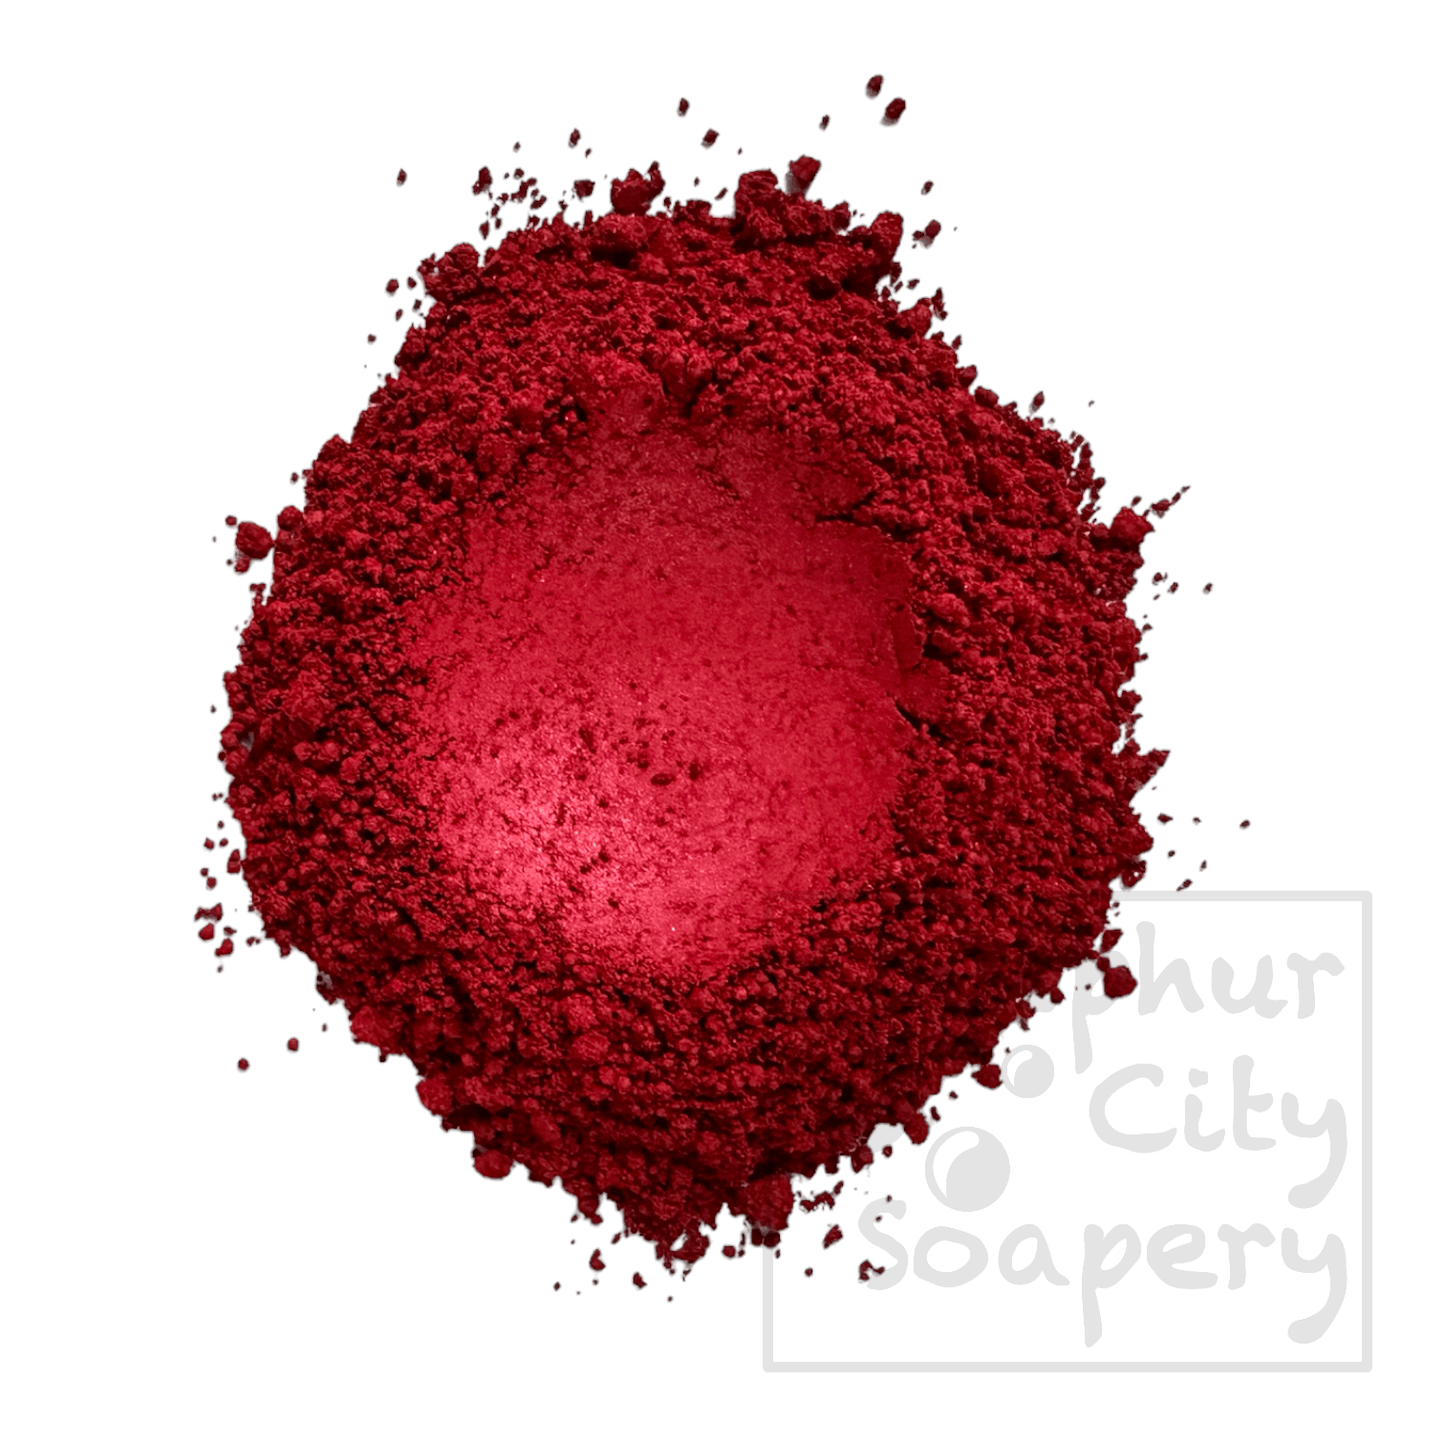 Sulphur City Soapery Red Mica - DIY soap colours.